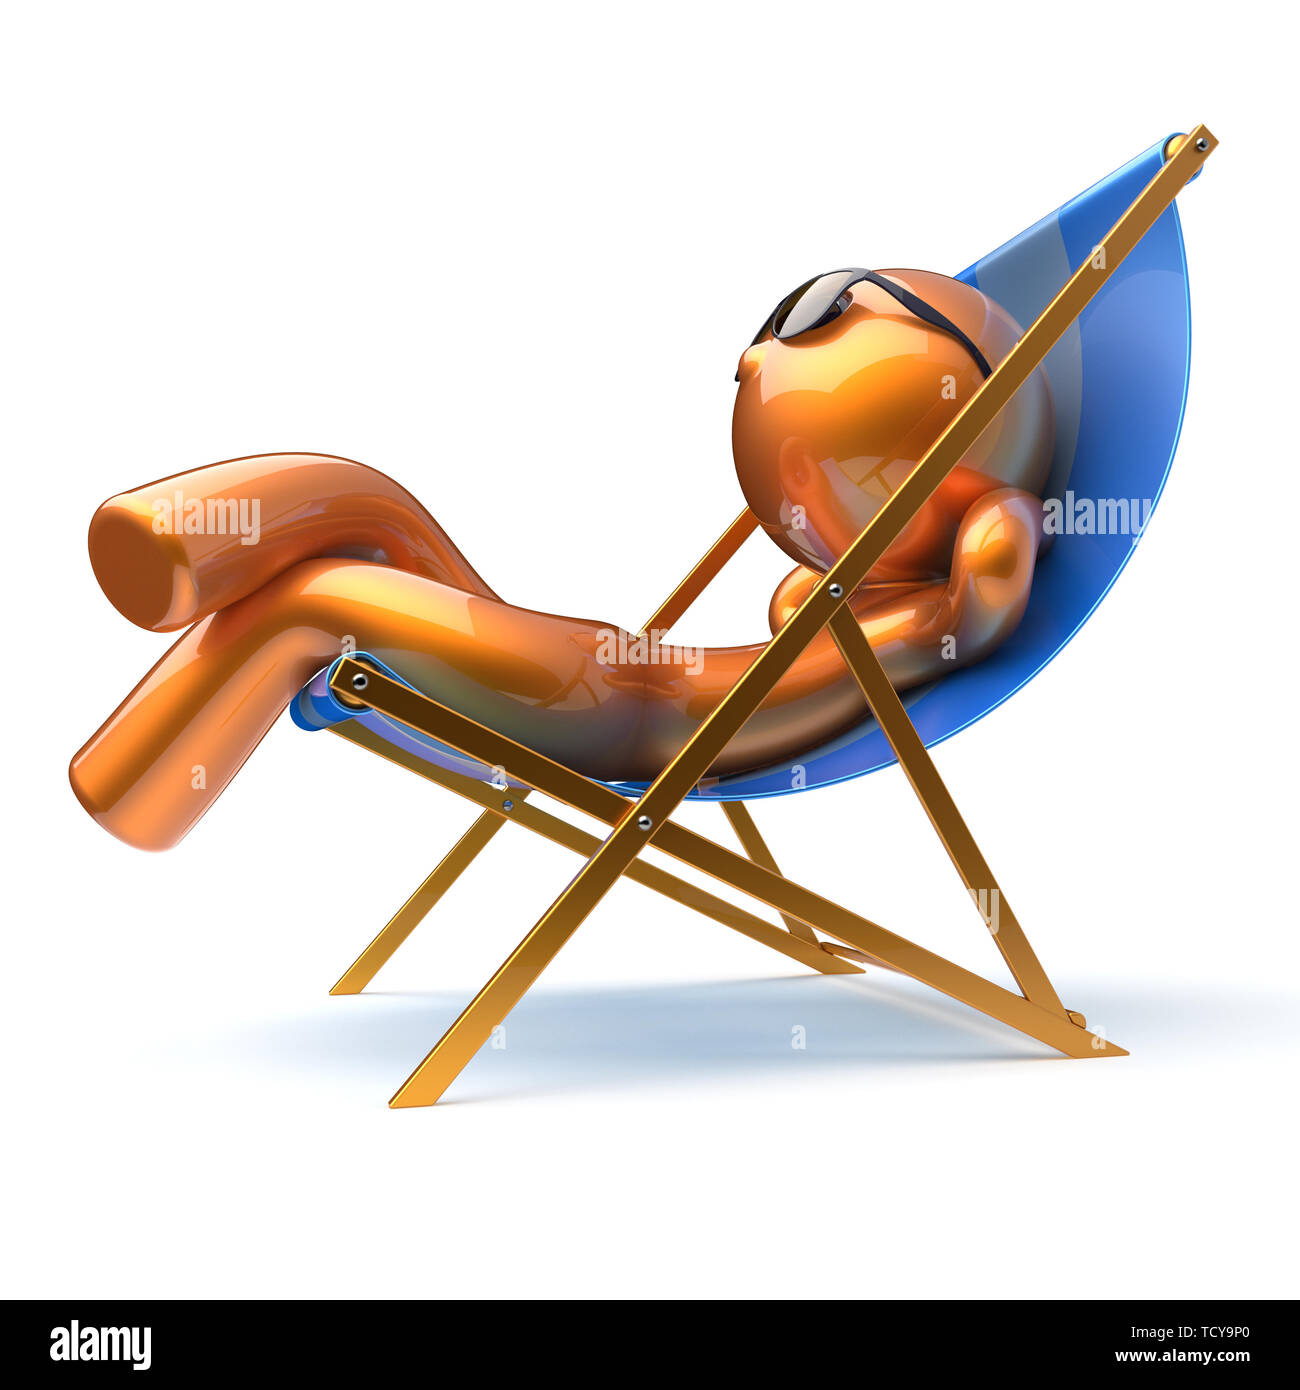 Man cartoon character relaxing carefree beach deck chair sunglasses summer  comfort stylized golden chilling person sun lounger chaise lounge tourist s  Stock Photo - Alamy